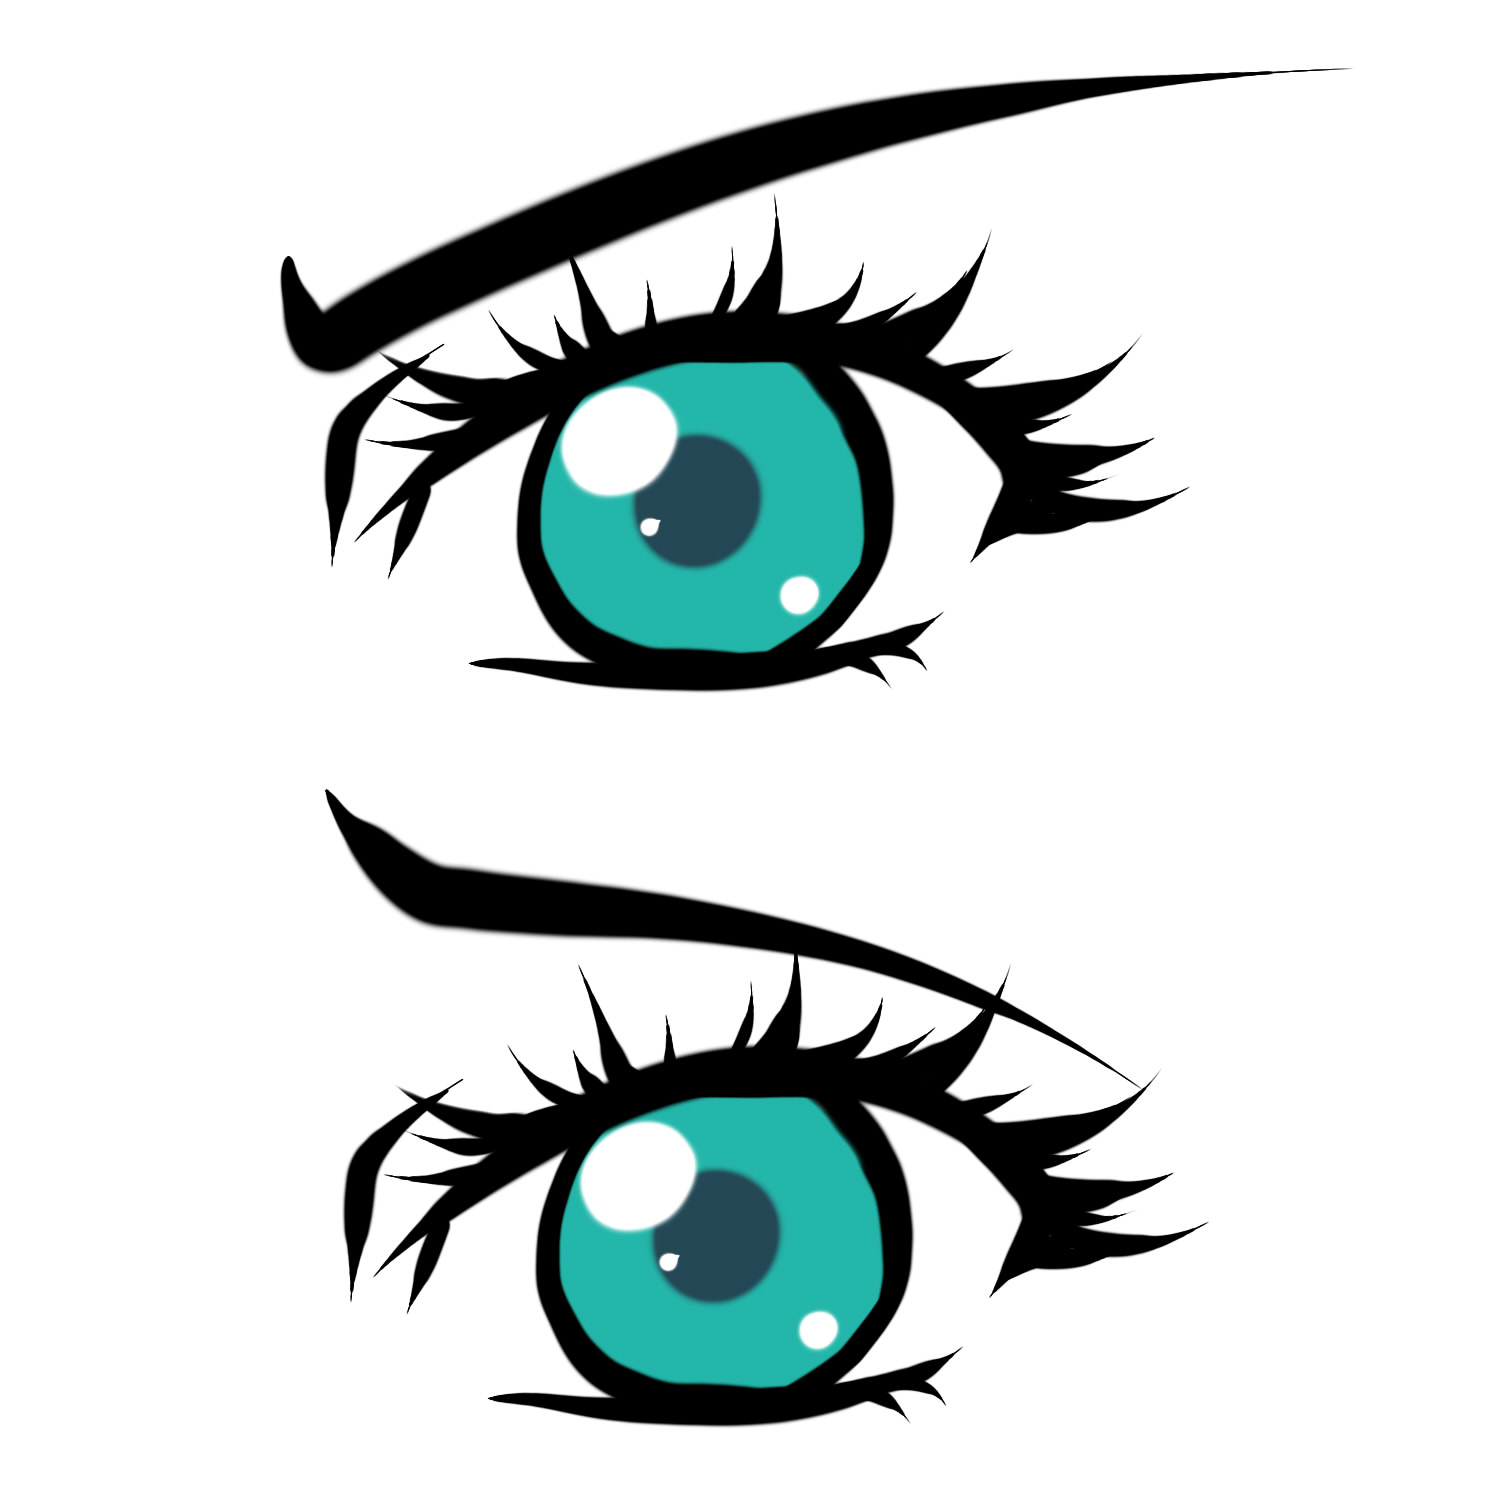 Adding style to Manga / Anime Eyes | Letraset Blog - Creative ... - ClipArt  Best - ClipArt Best